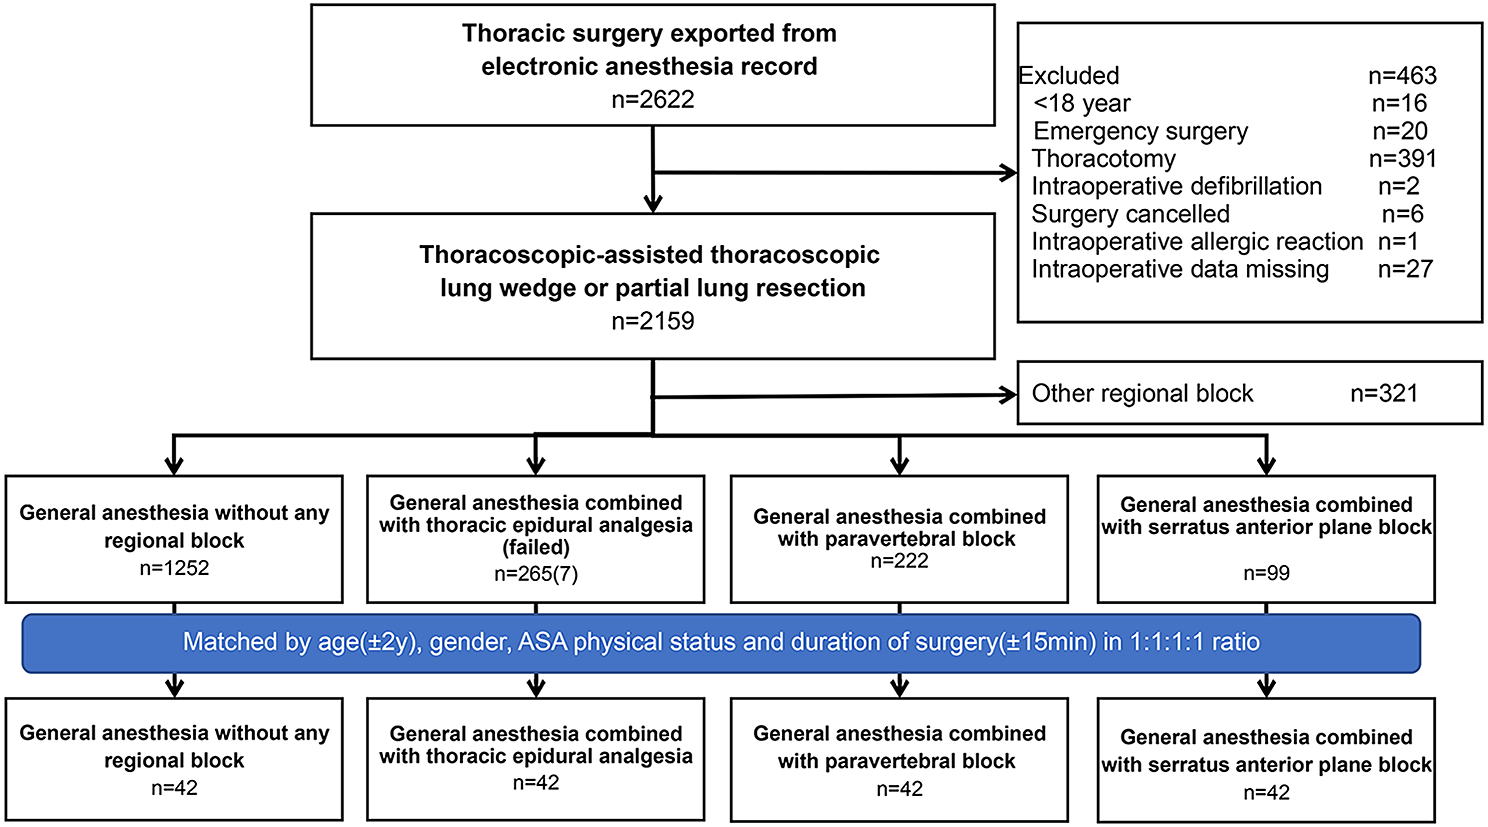 The association of regional block with intraoperative opioid consumption in patients undergoing video-assisted thoracoscopic surgery: a single-center, retrospective study